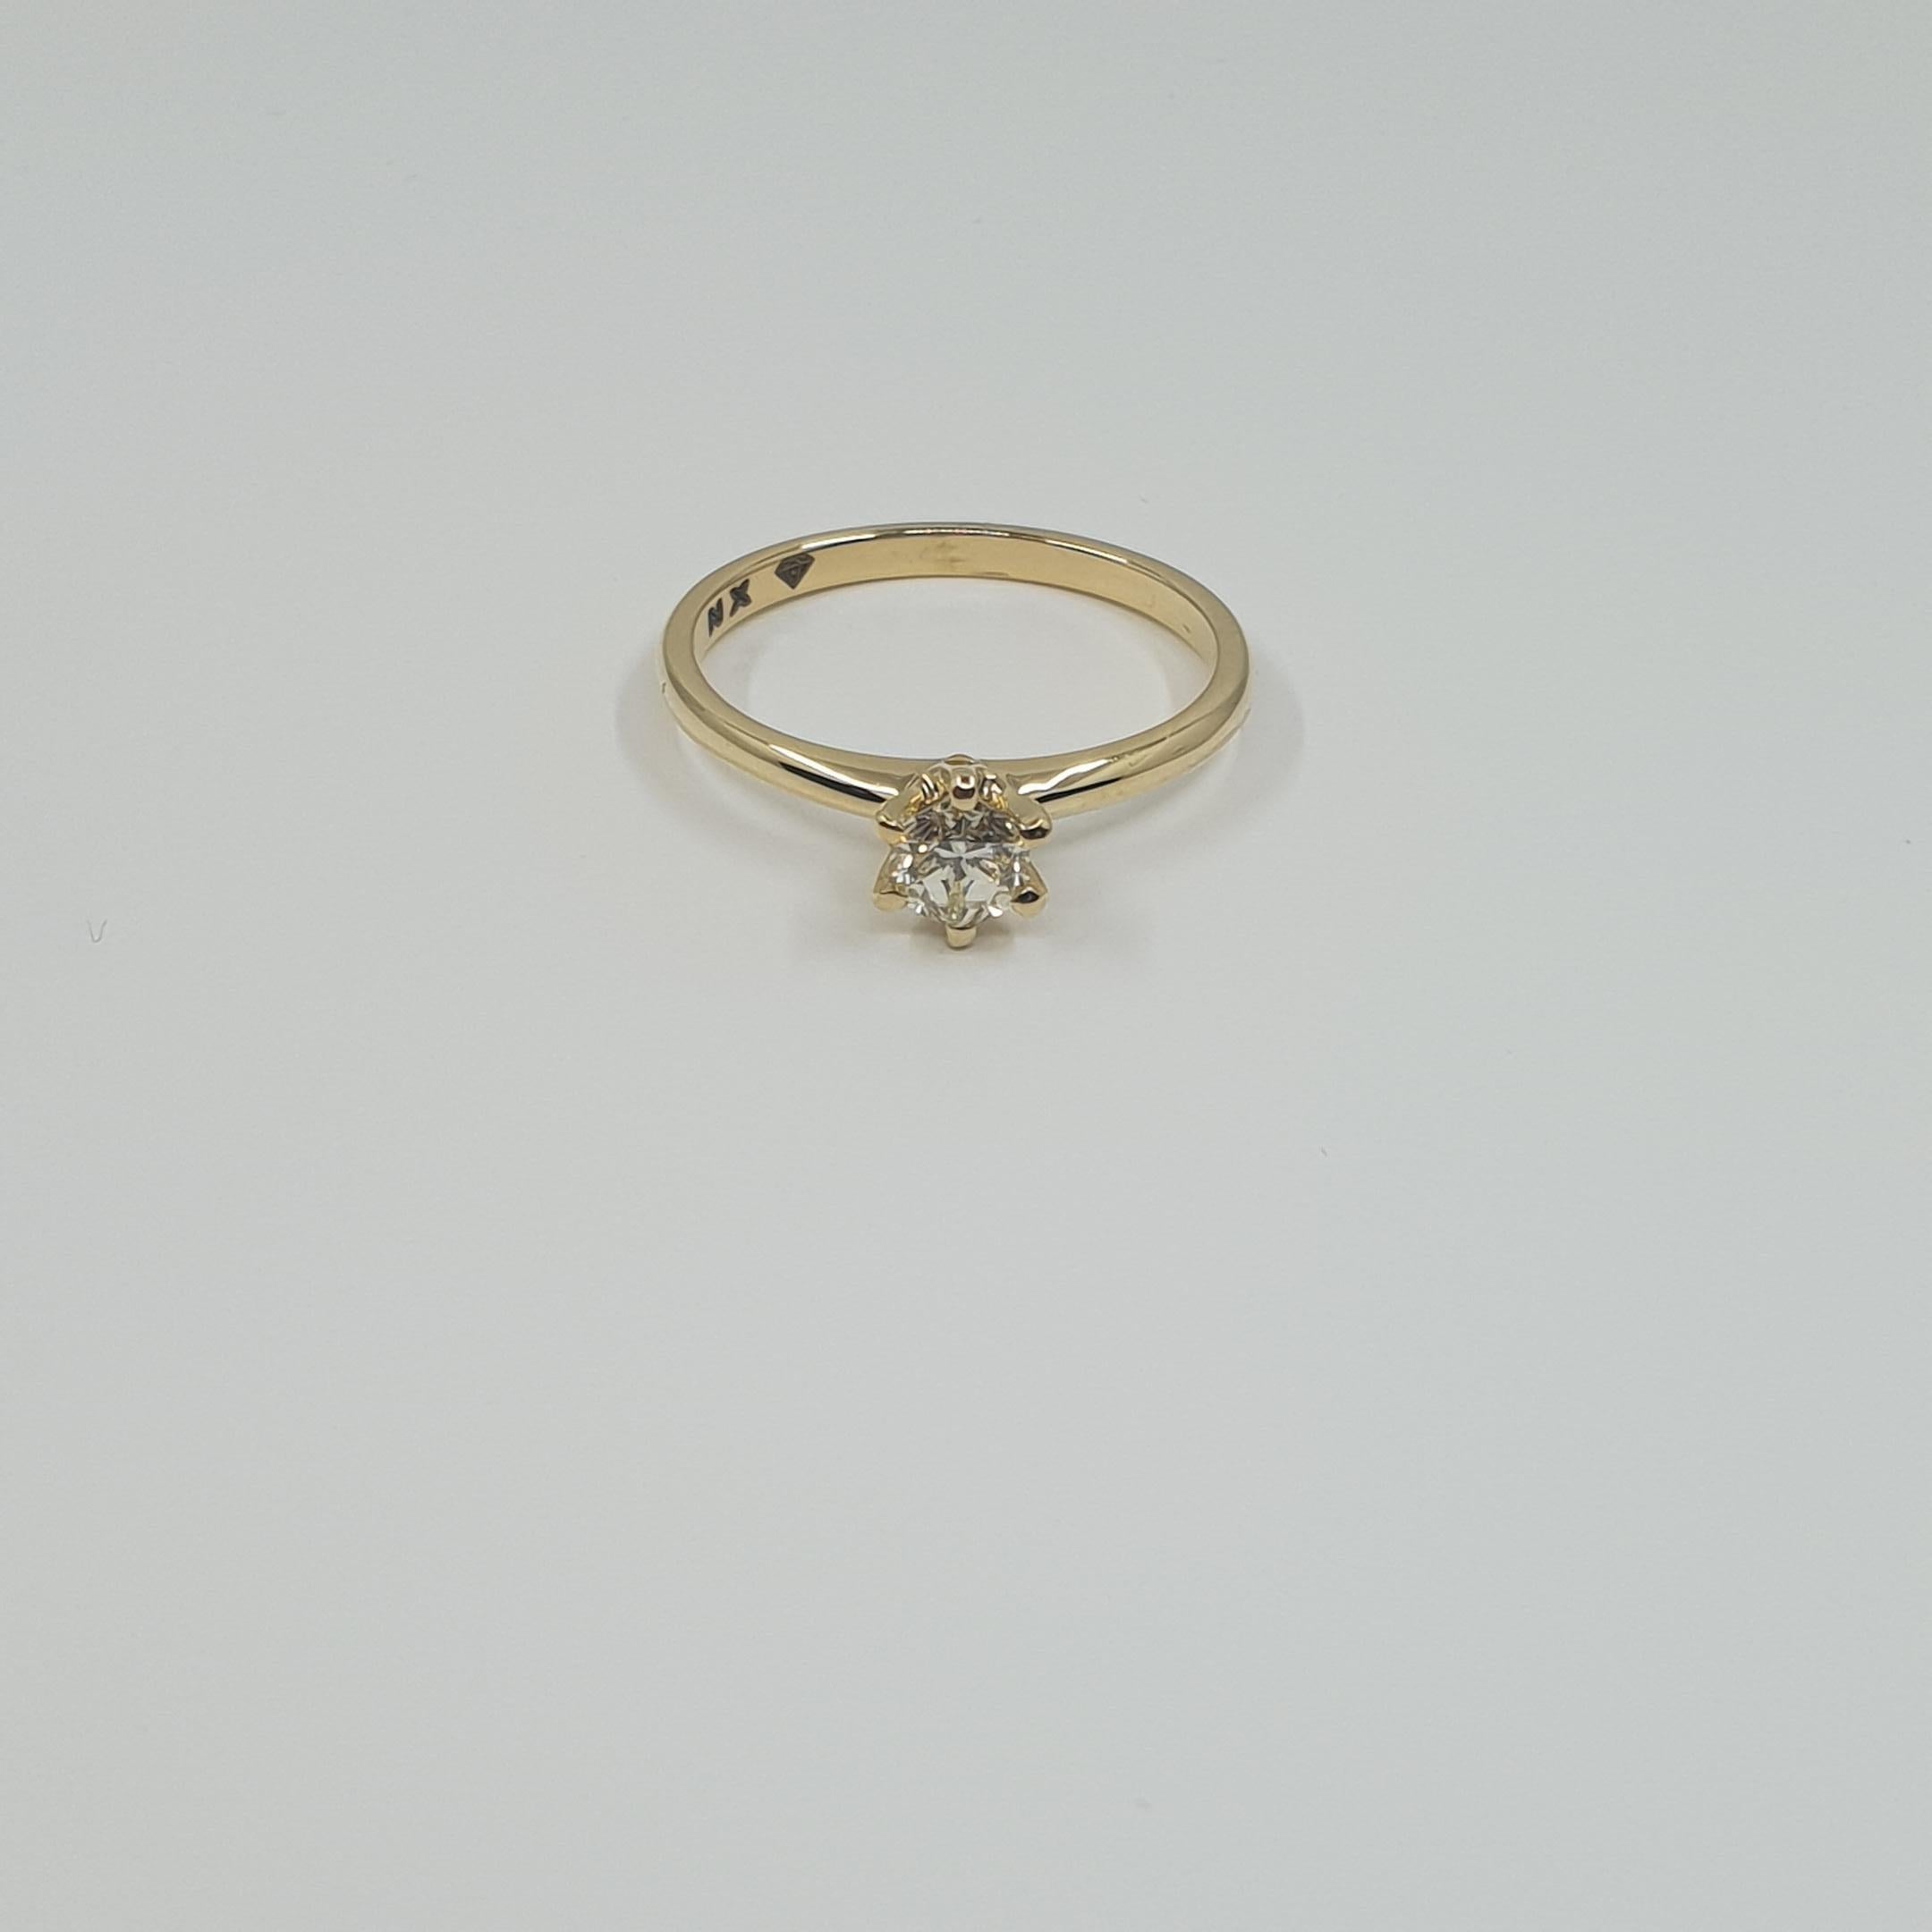 GIA Certified Diamond 0.38 S-T/VS2 Solitaire Ring 750 Gold in 6 Prong Setting For Sale 3